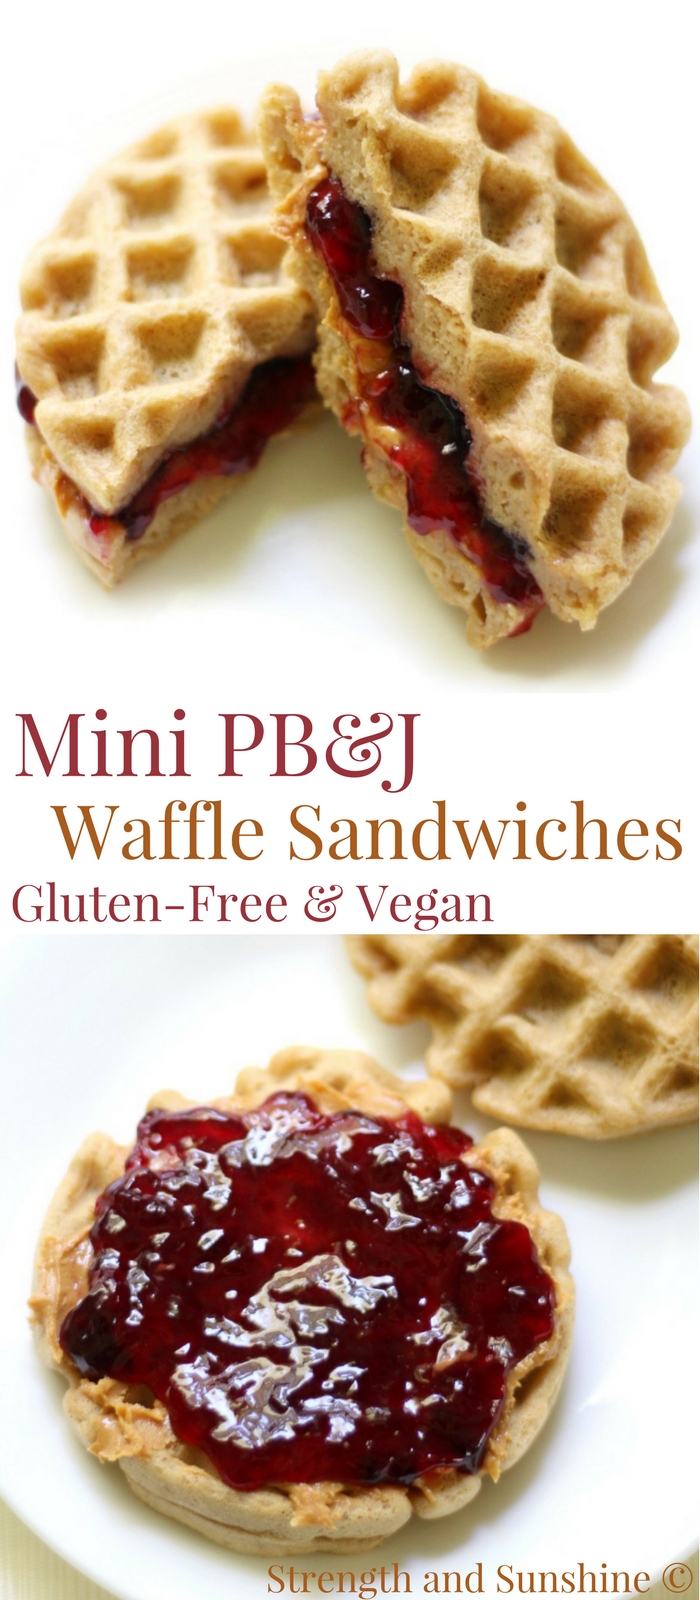 Mini Gluten-Free Peanut Butter & Jelly Waffle Sandwiches (Vegan) | Strength and Sunshine @RebeccaGF666 Breakfast, lunch, or snack, PB&J is good for any time of day! These Mini Gluten-Free Peanut Butter & Jelly Waffle Sandwiches are vegan, fun for kids & adults, healthy & protein-packed! A recipe for all peanut butter lovers and anyone who wants to shakeup their boring sandwich routine! #glutenfree #vegan #peanutbutter #jelly #waffles #breakfast #lunch #kidfriendly #strengthandsunshine